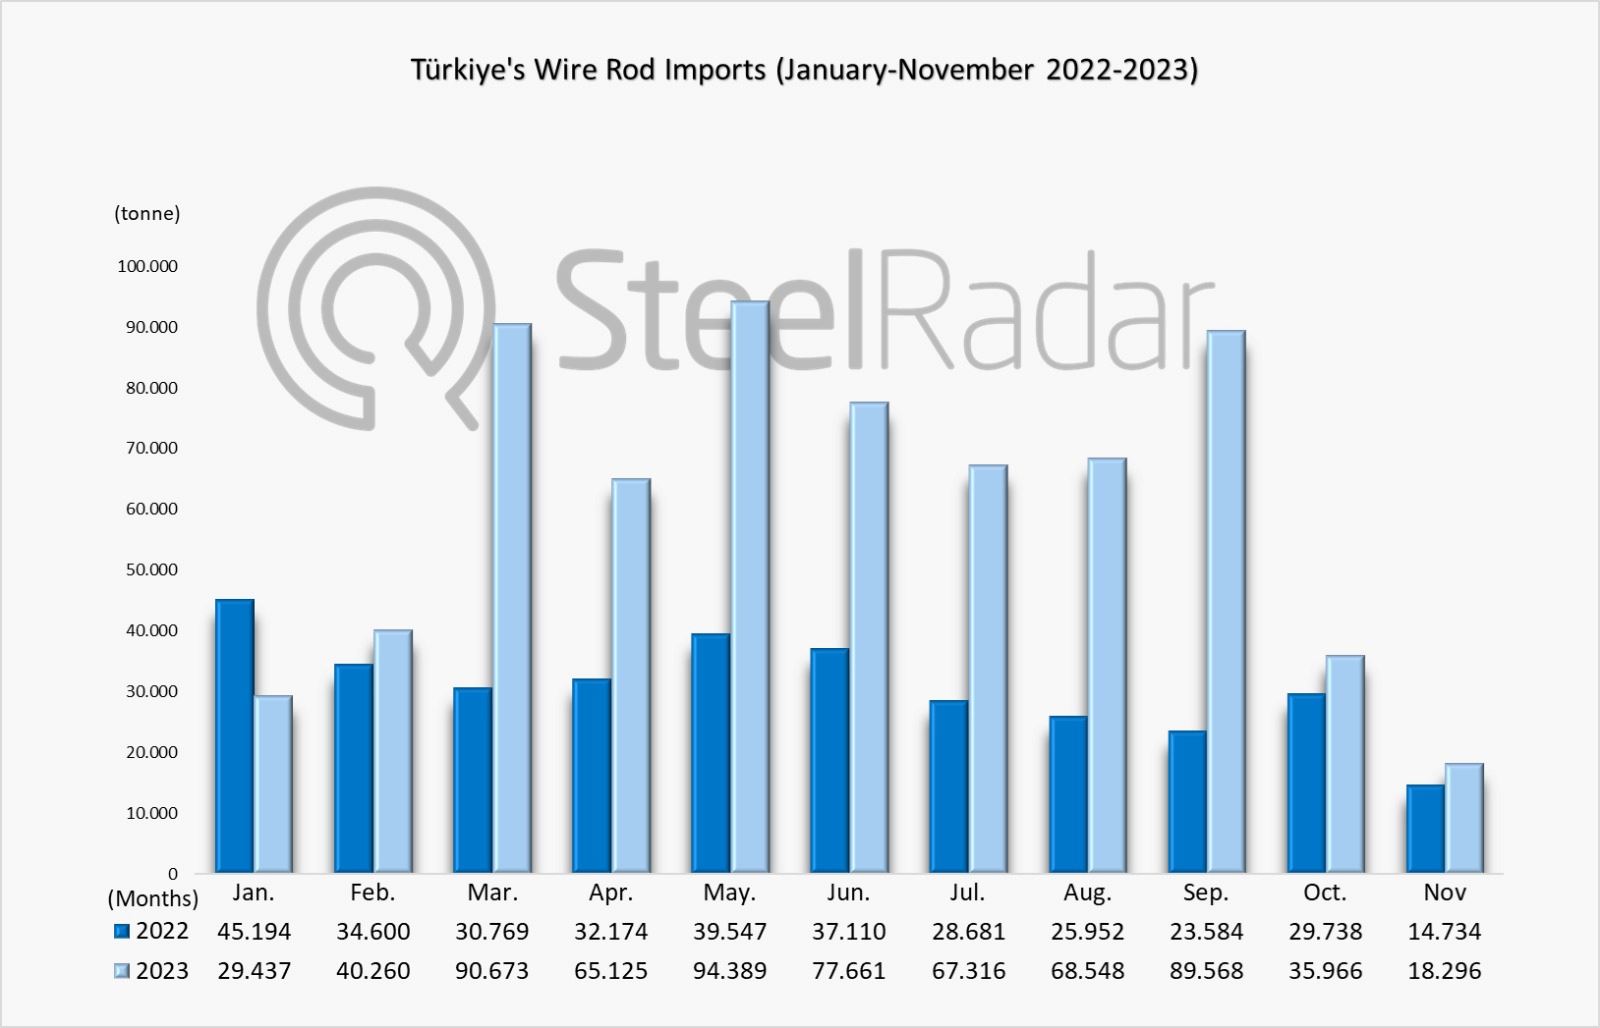 November is the month for Turkey's wire rod imports! Lowest imports despite annual increase